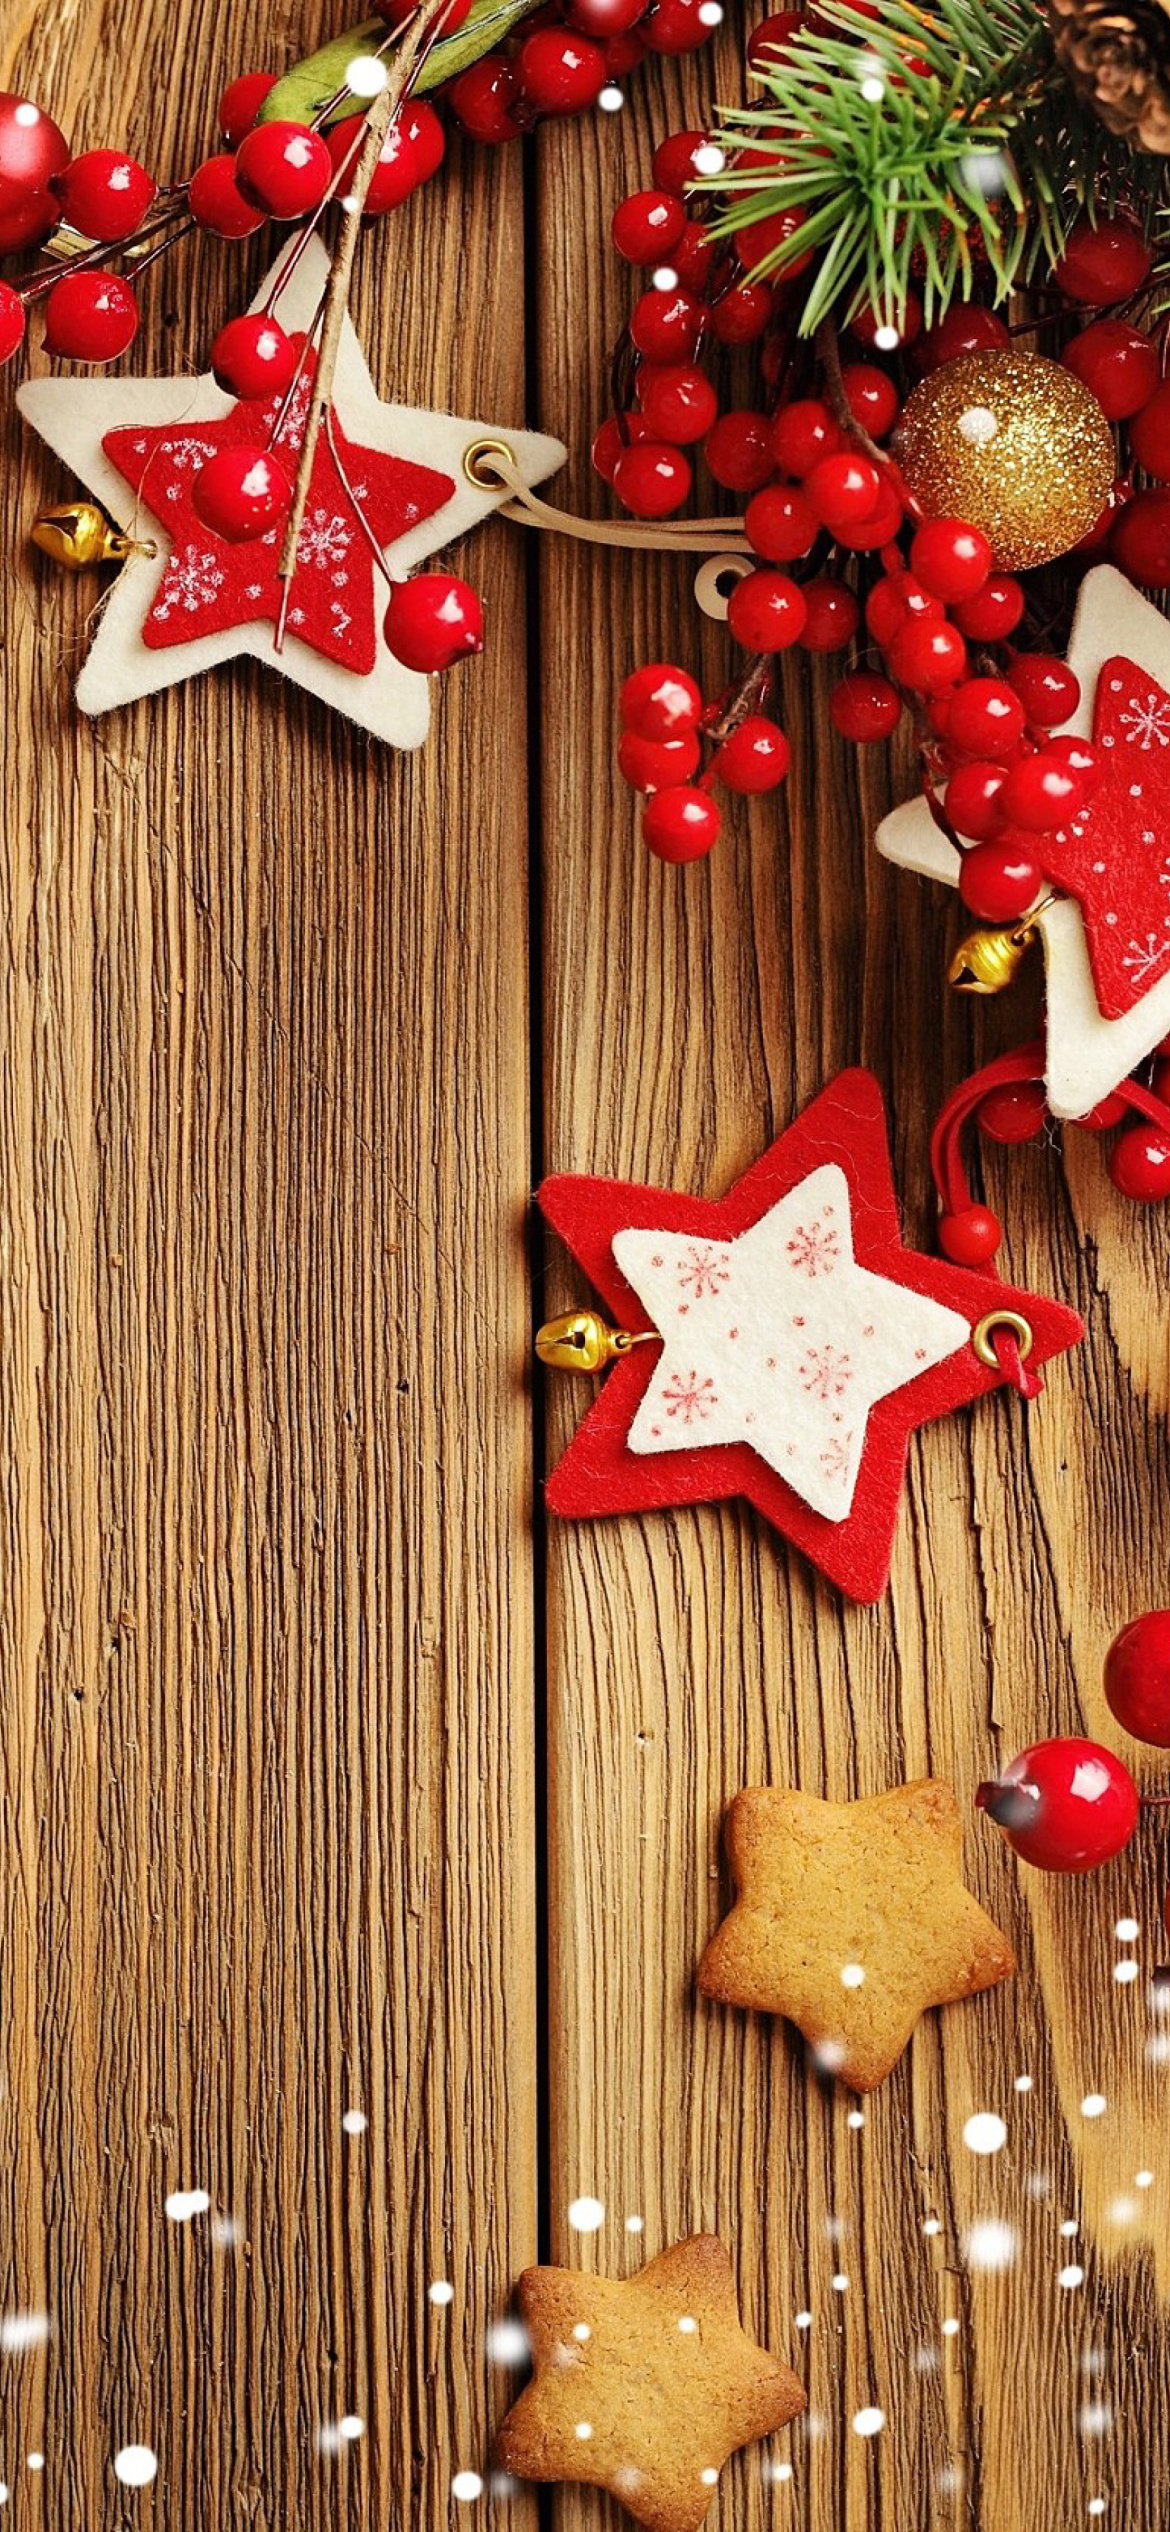 Xmas Wooden Decorations with Cones screenshot #1 1170x2532